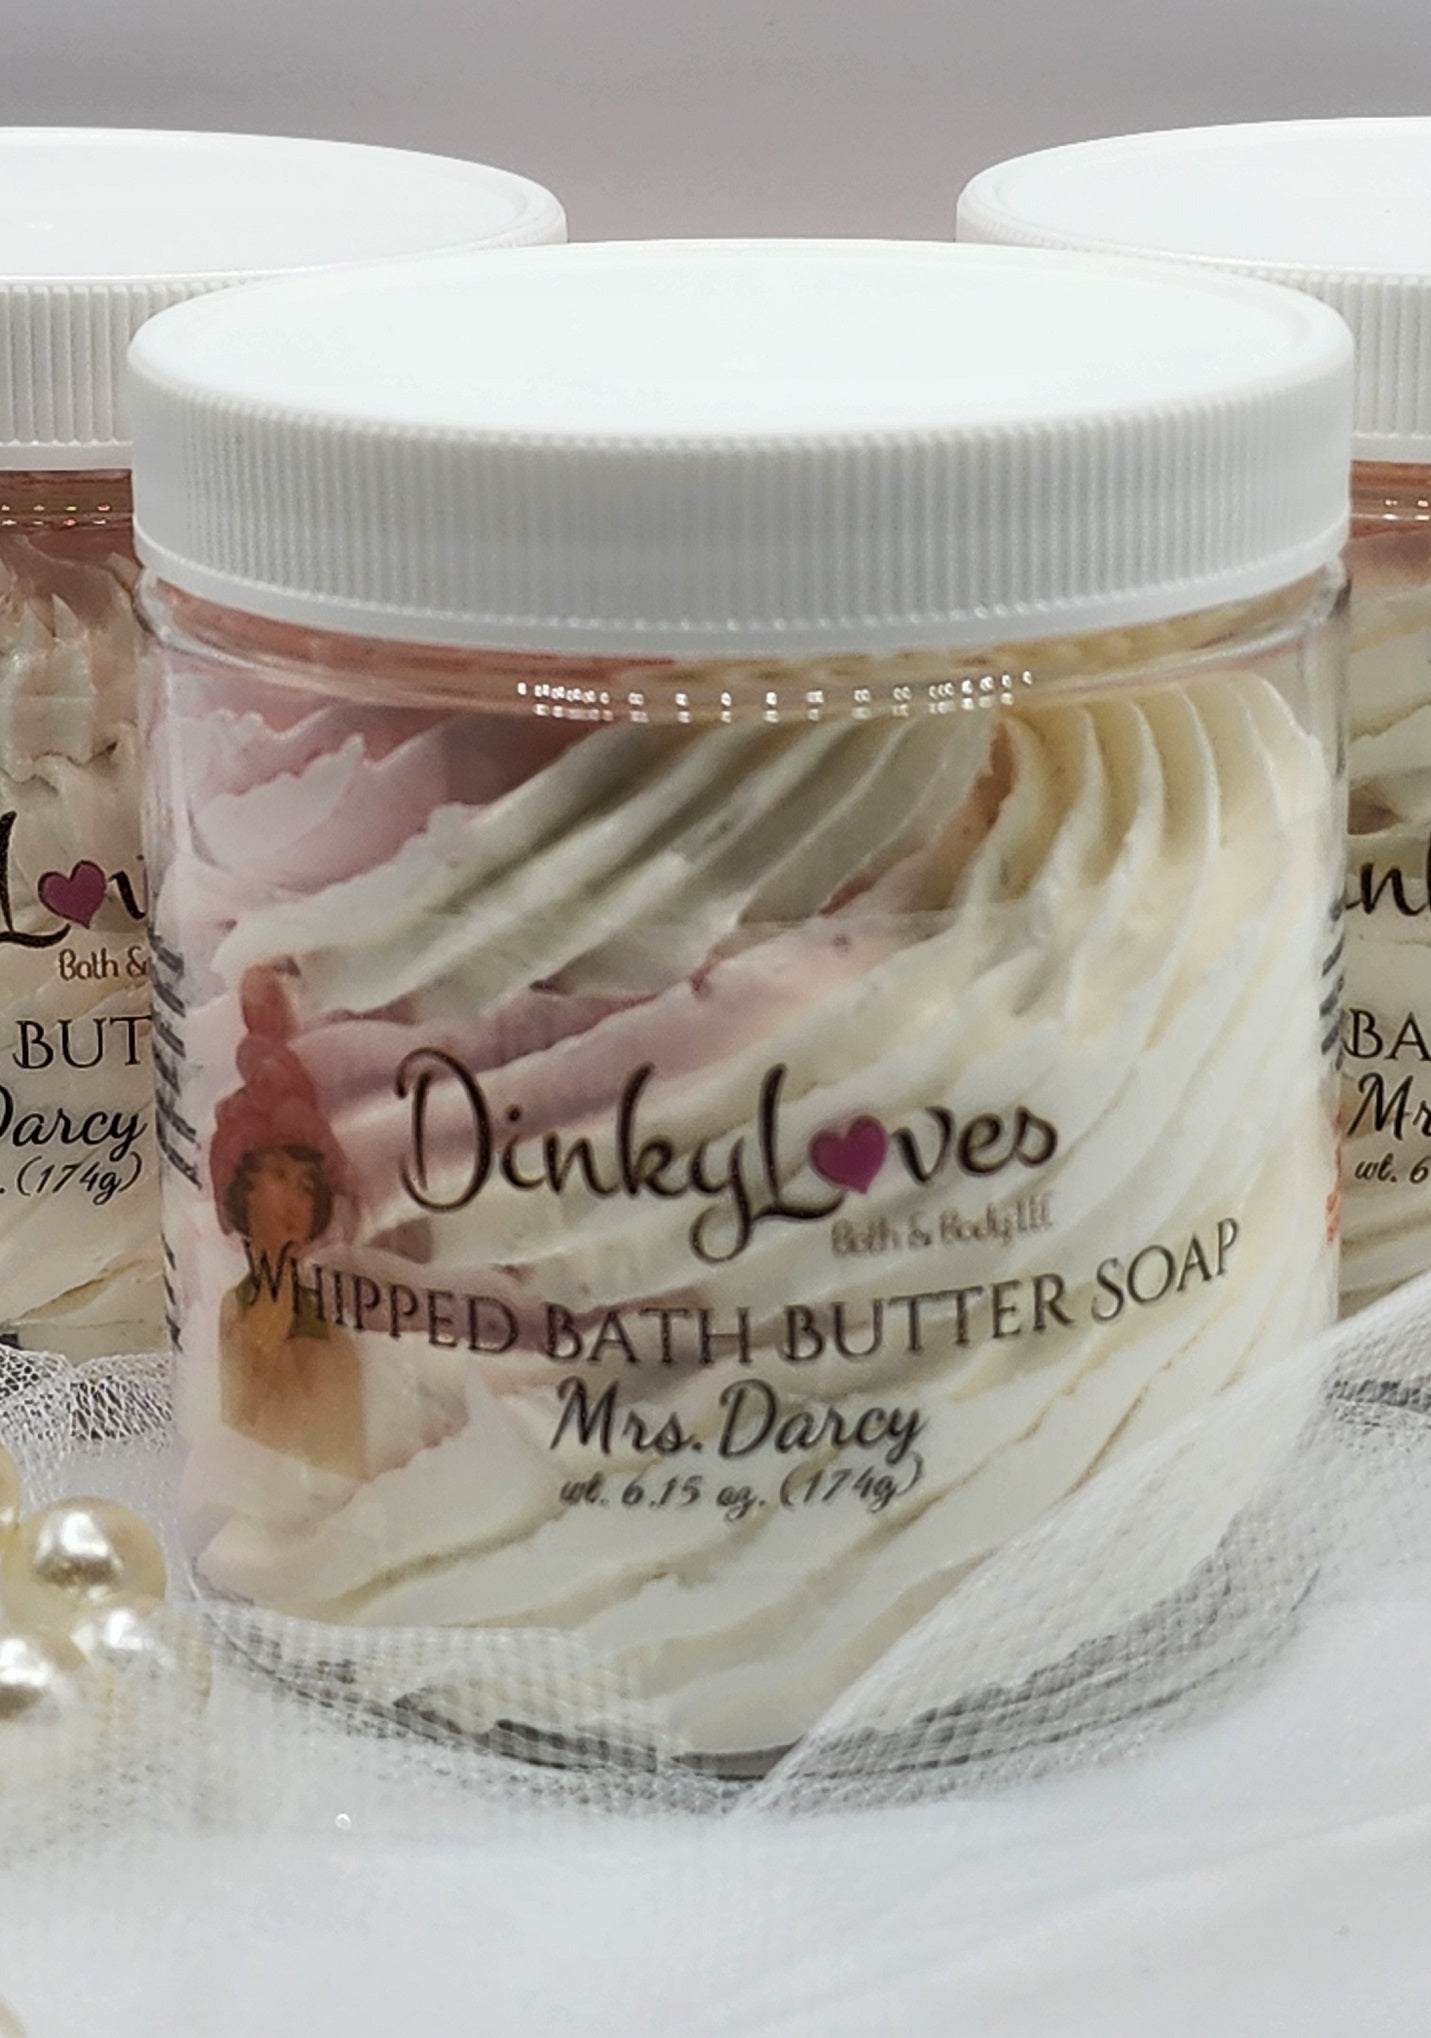 MRS. DARCY Whipped Bath Butter Soap / Gift Idea / Luxury Product / Cocoa Butter